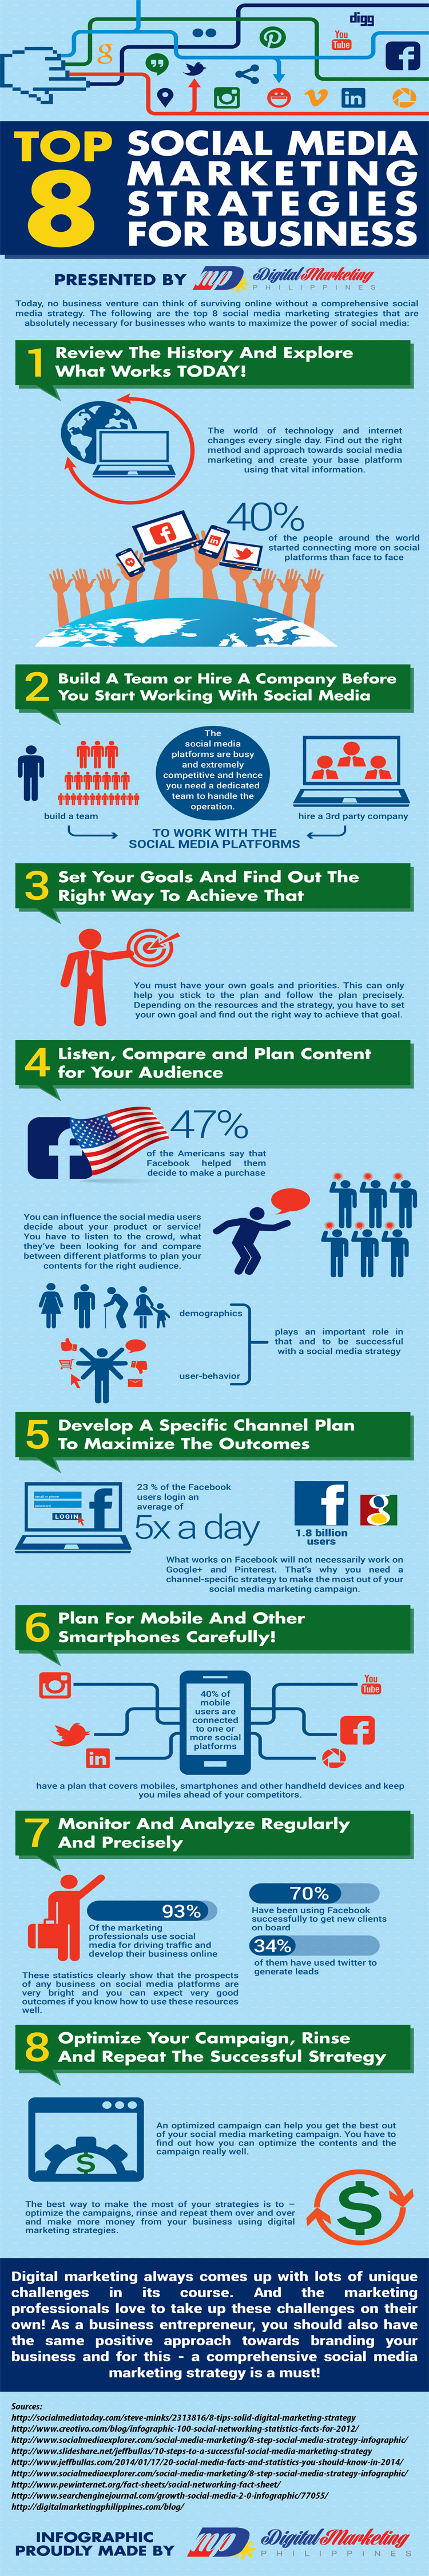 Top 8 Social Media Marketing Strategies for Business (Infographic) - An Infographic from Digital Marketing Philippines